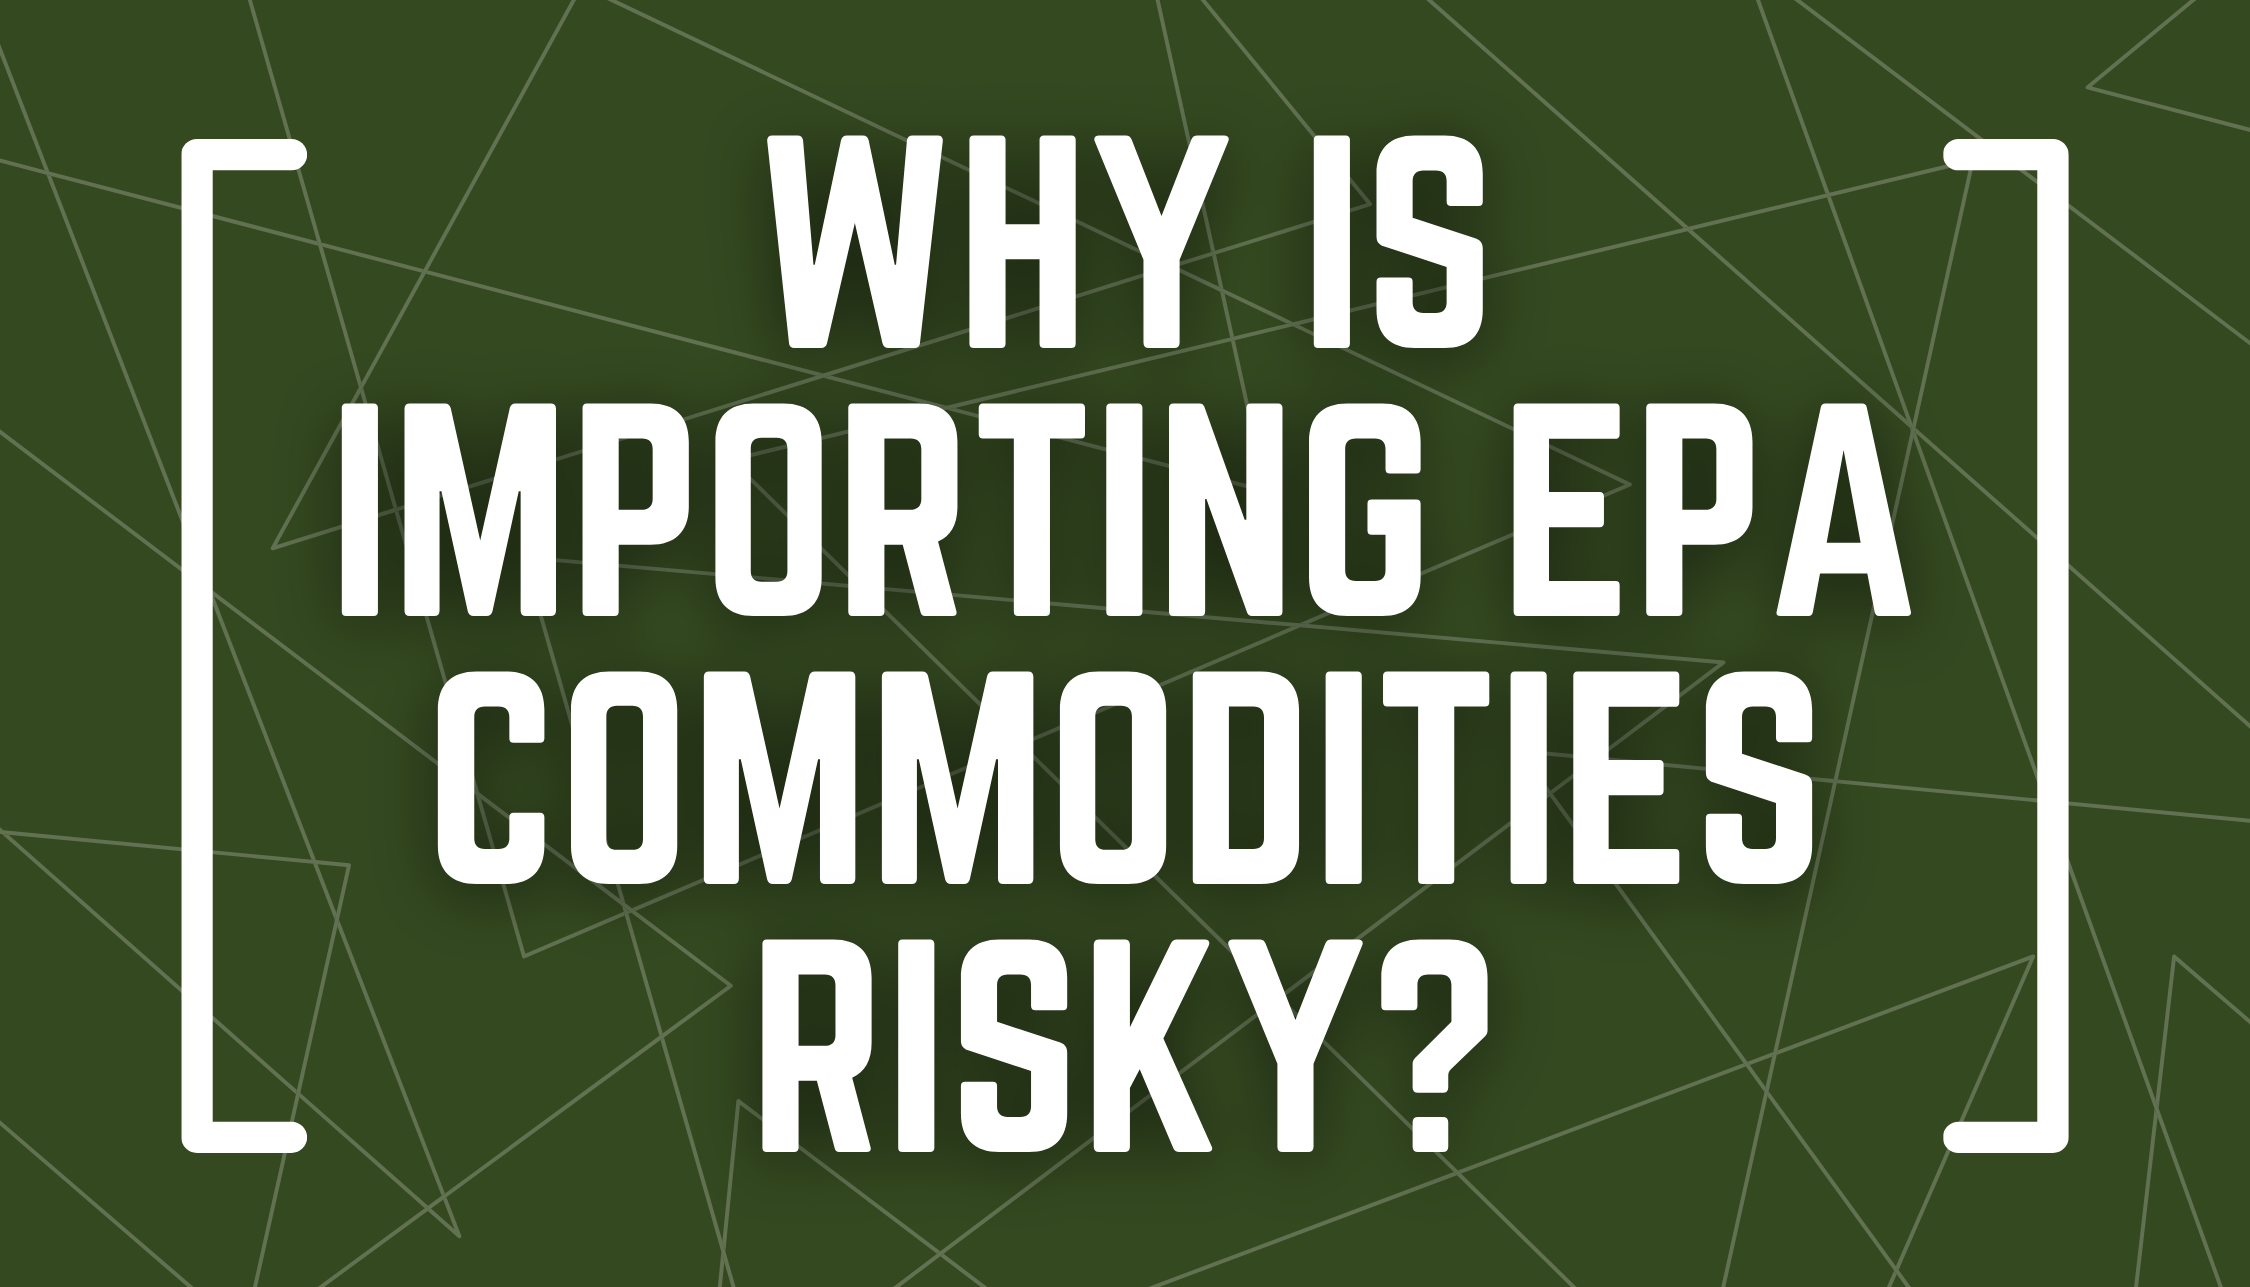 Why Is Importing EPA Commodities Risky?